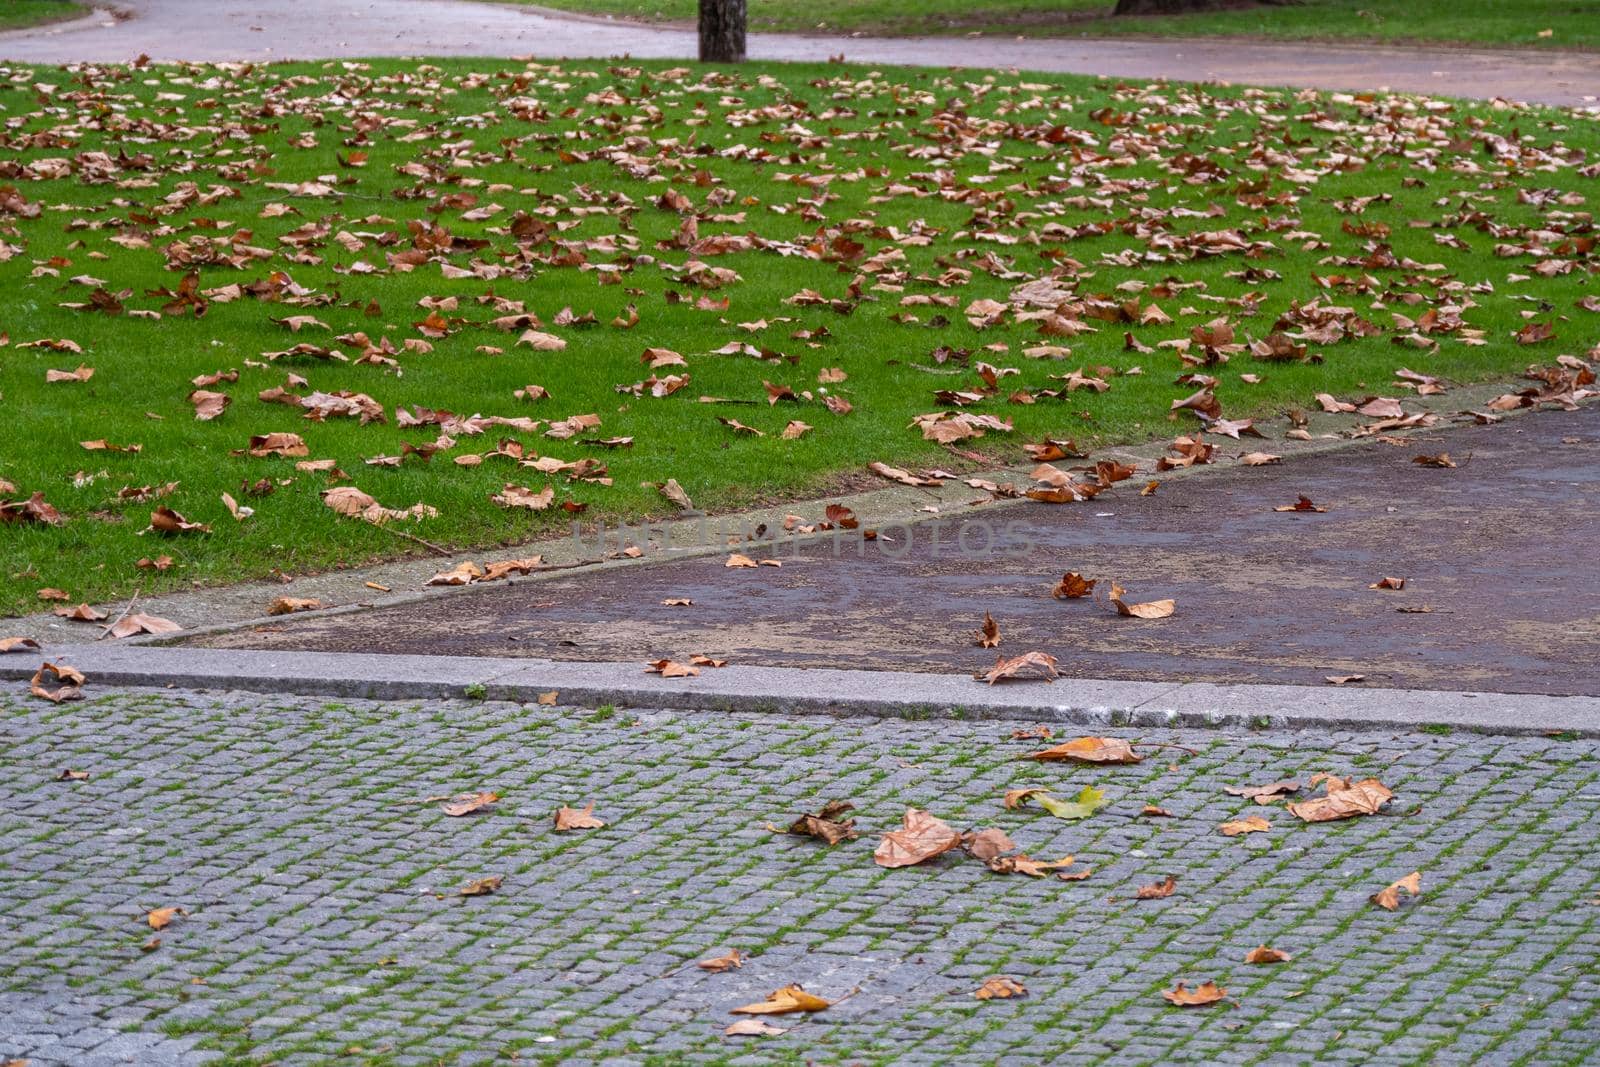 Fallen maple leaves on grass and paving stones in a city park.